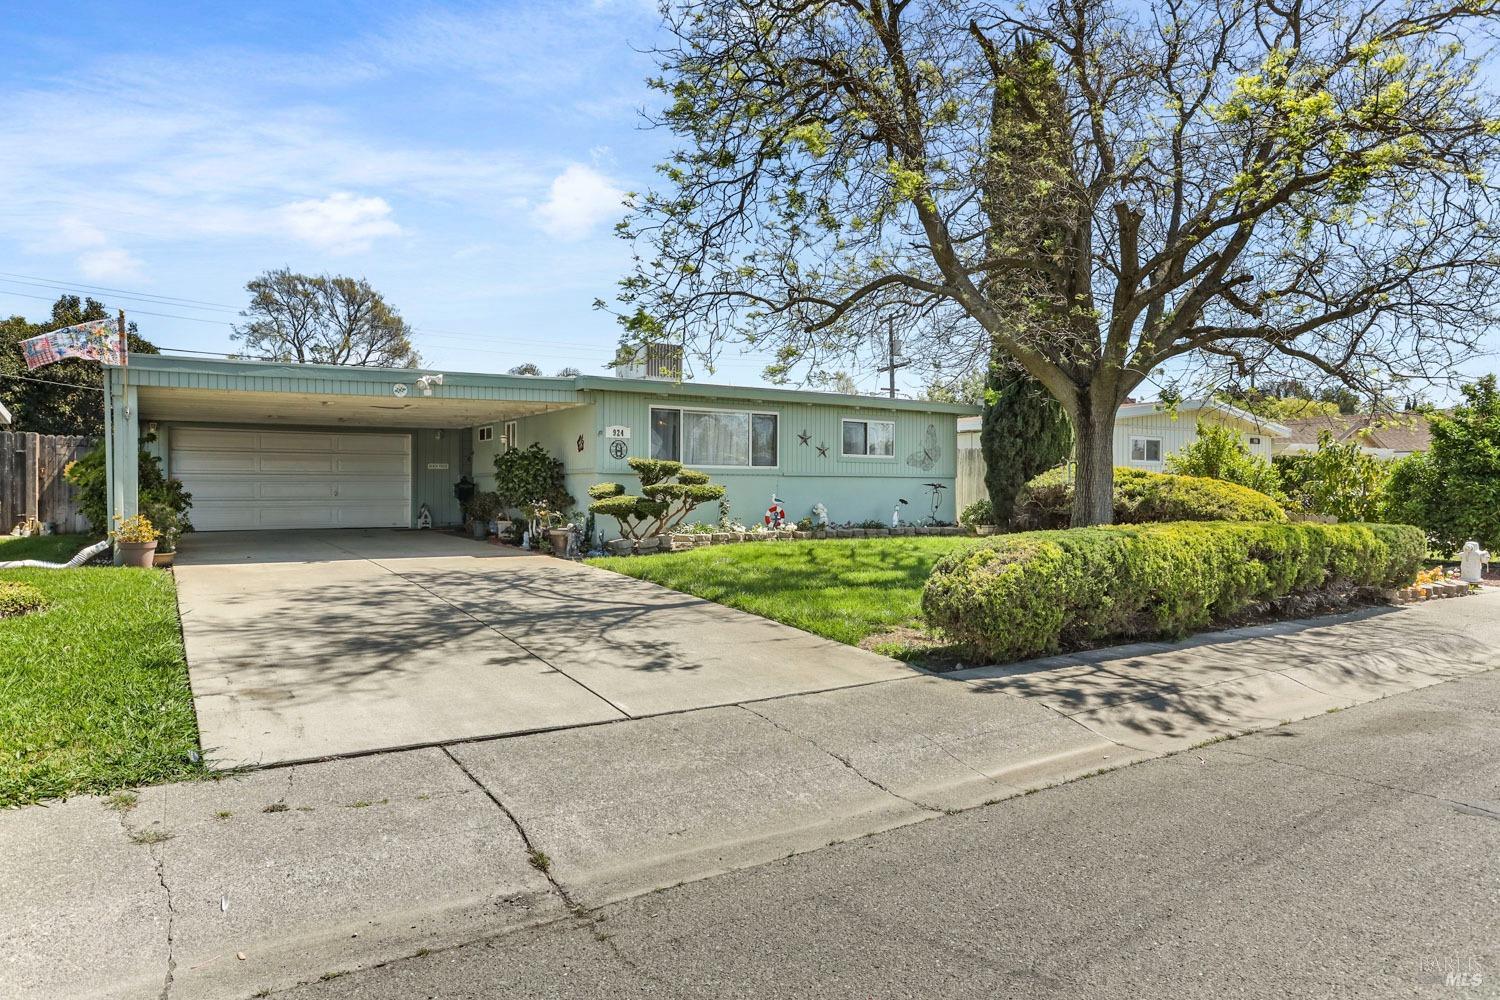 Photo of 924 4th St in Fairfield, CA